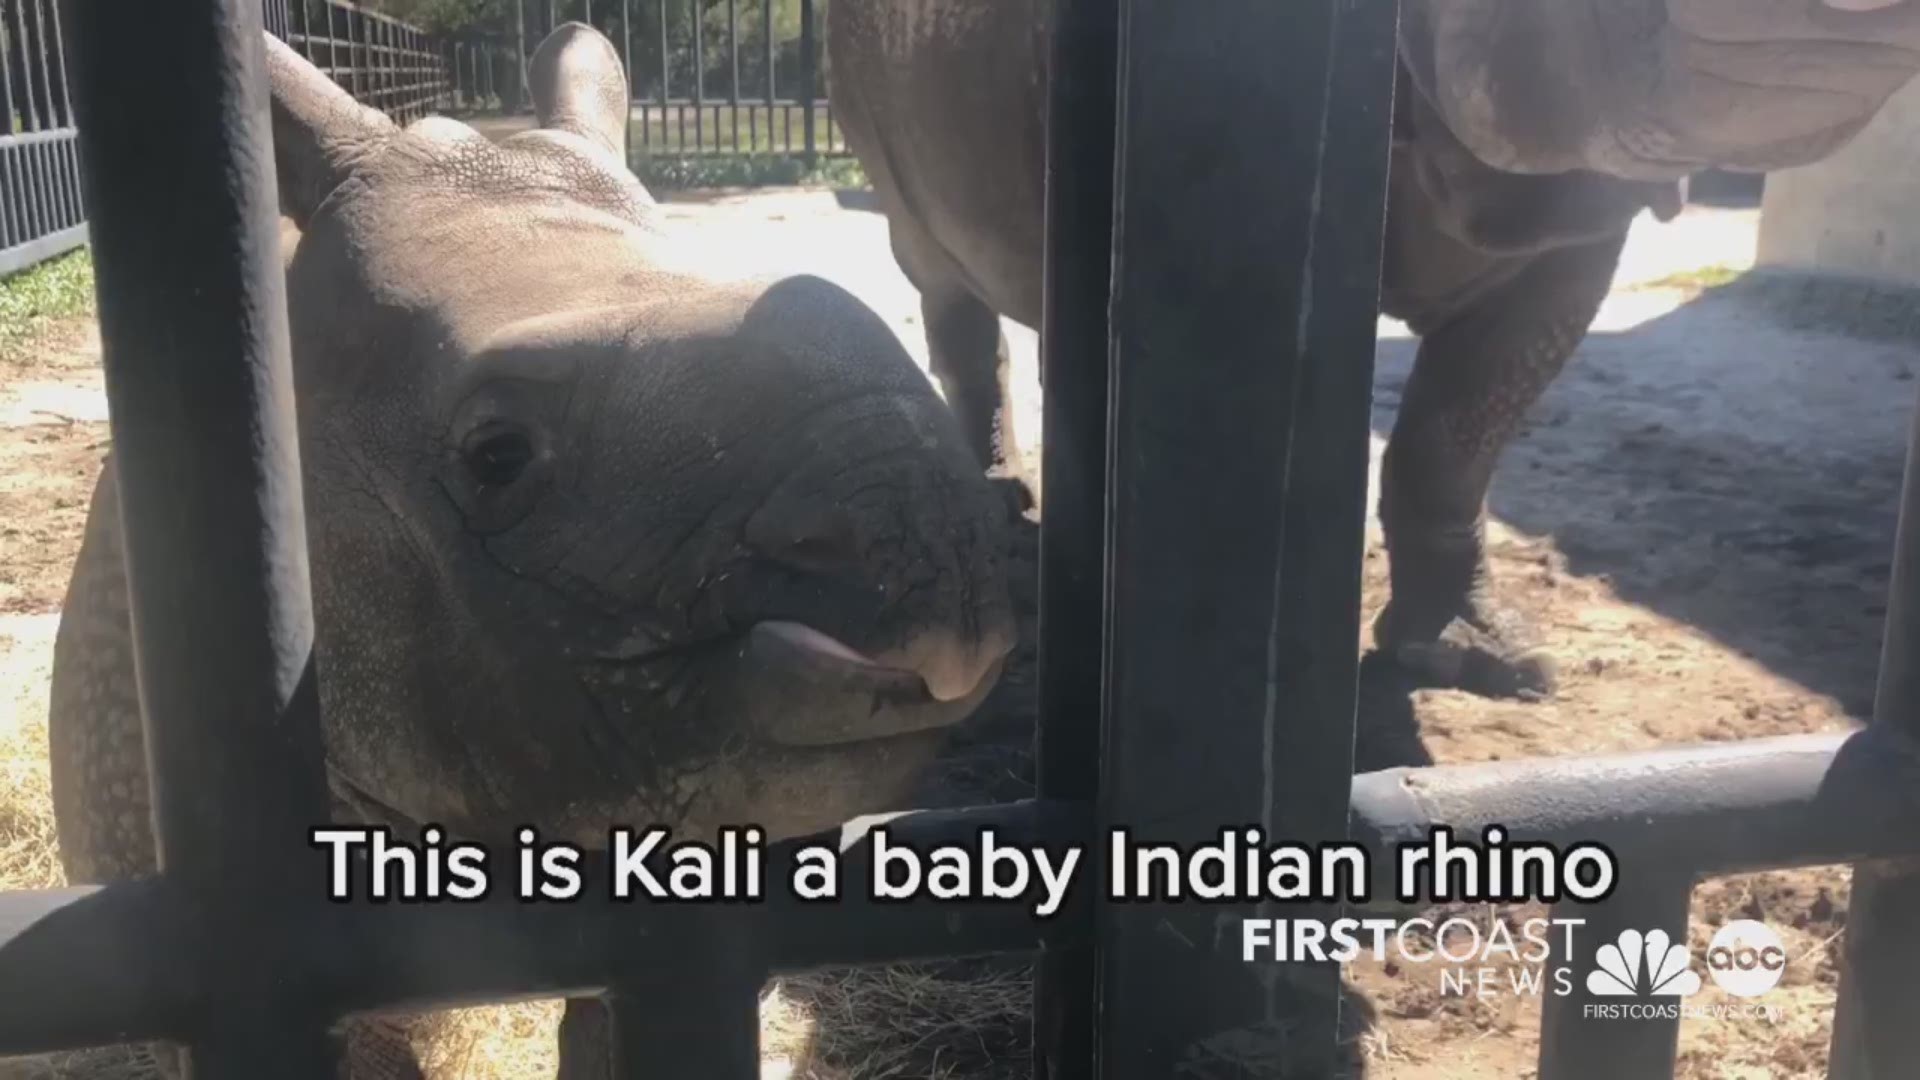 Tidbit was born in November and Kali was born late December last year.